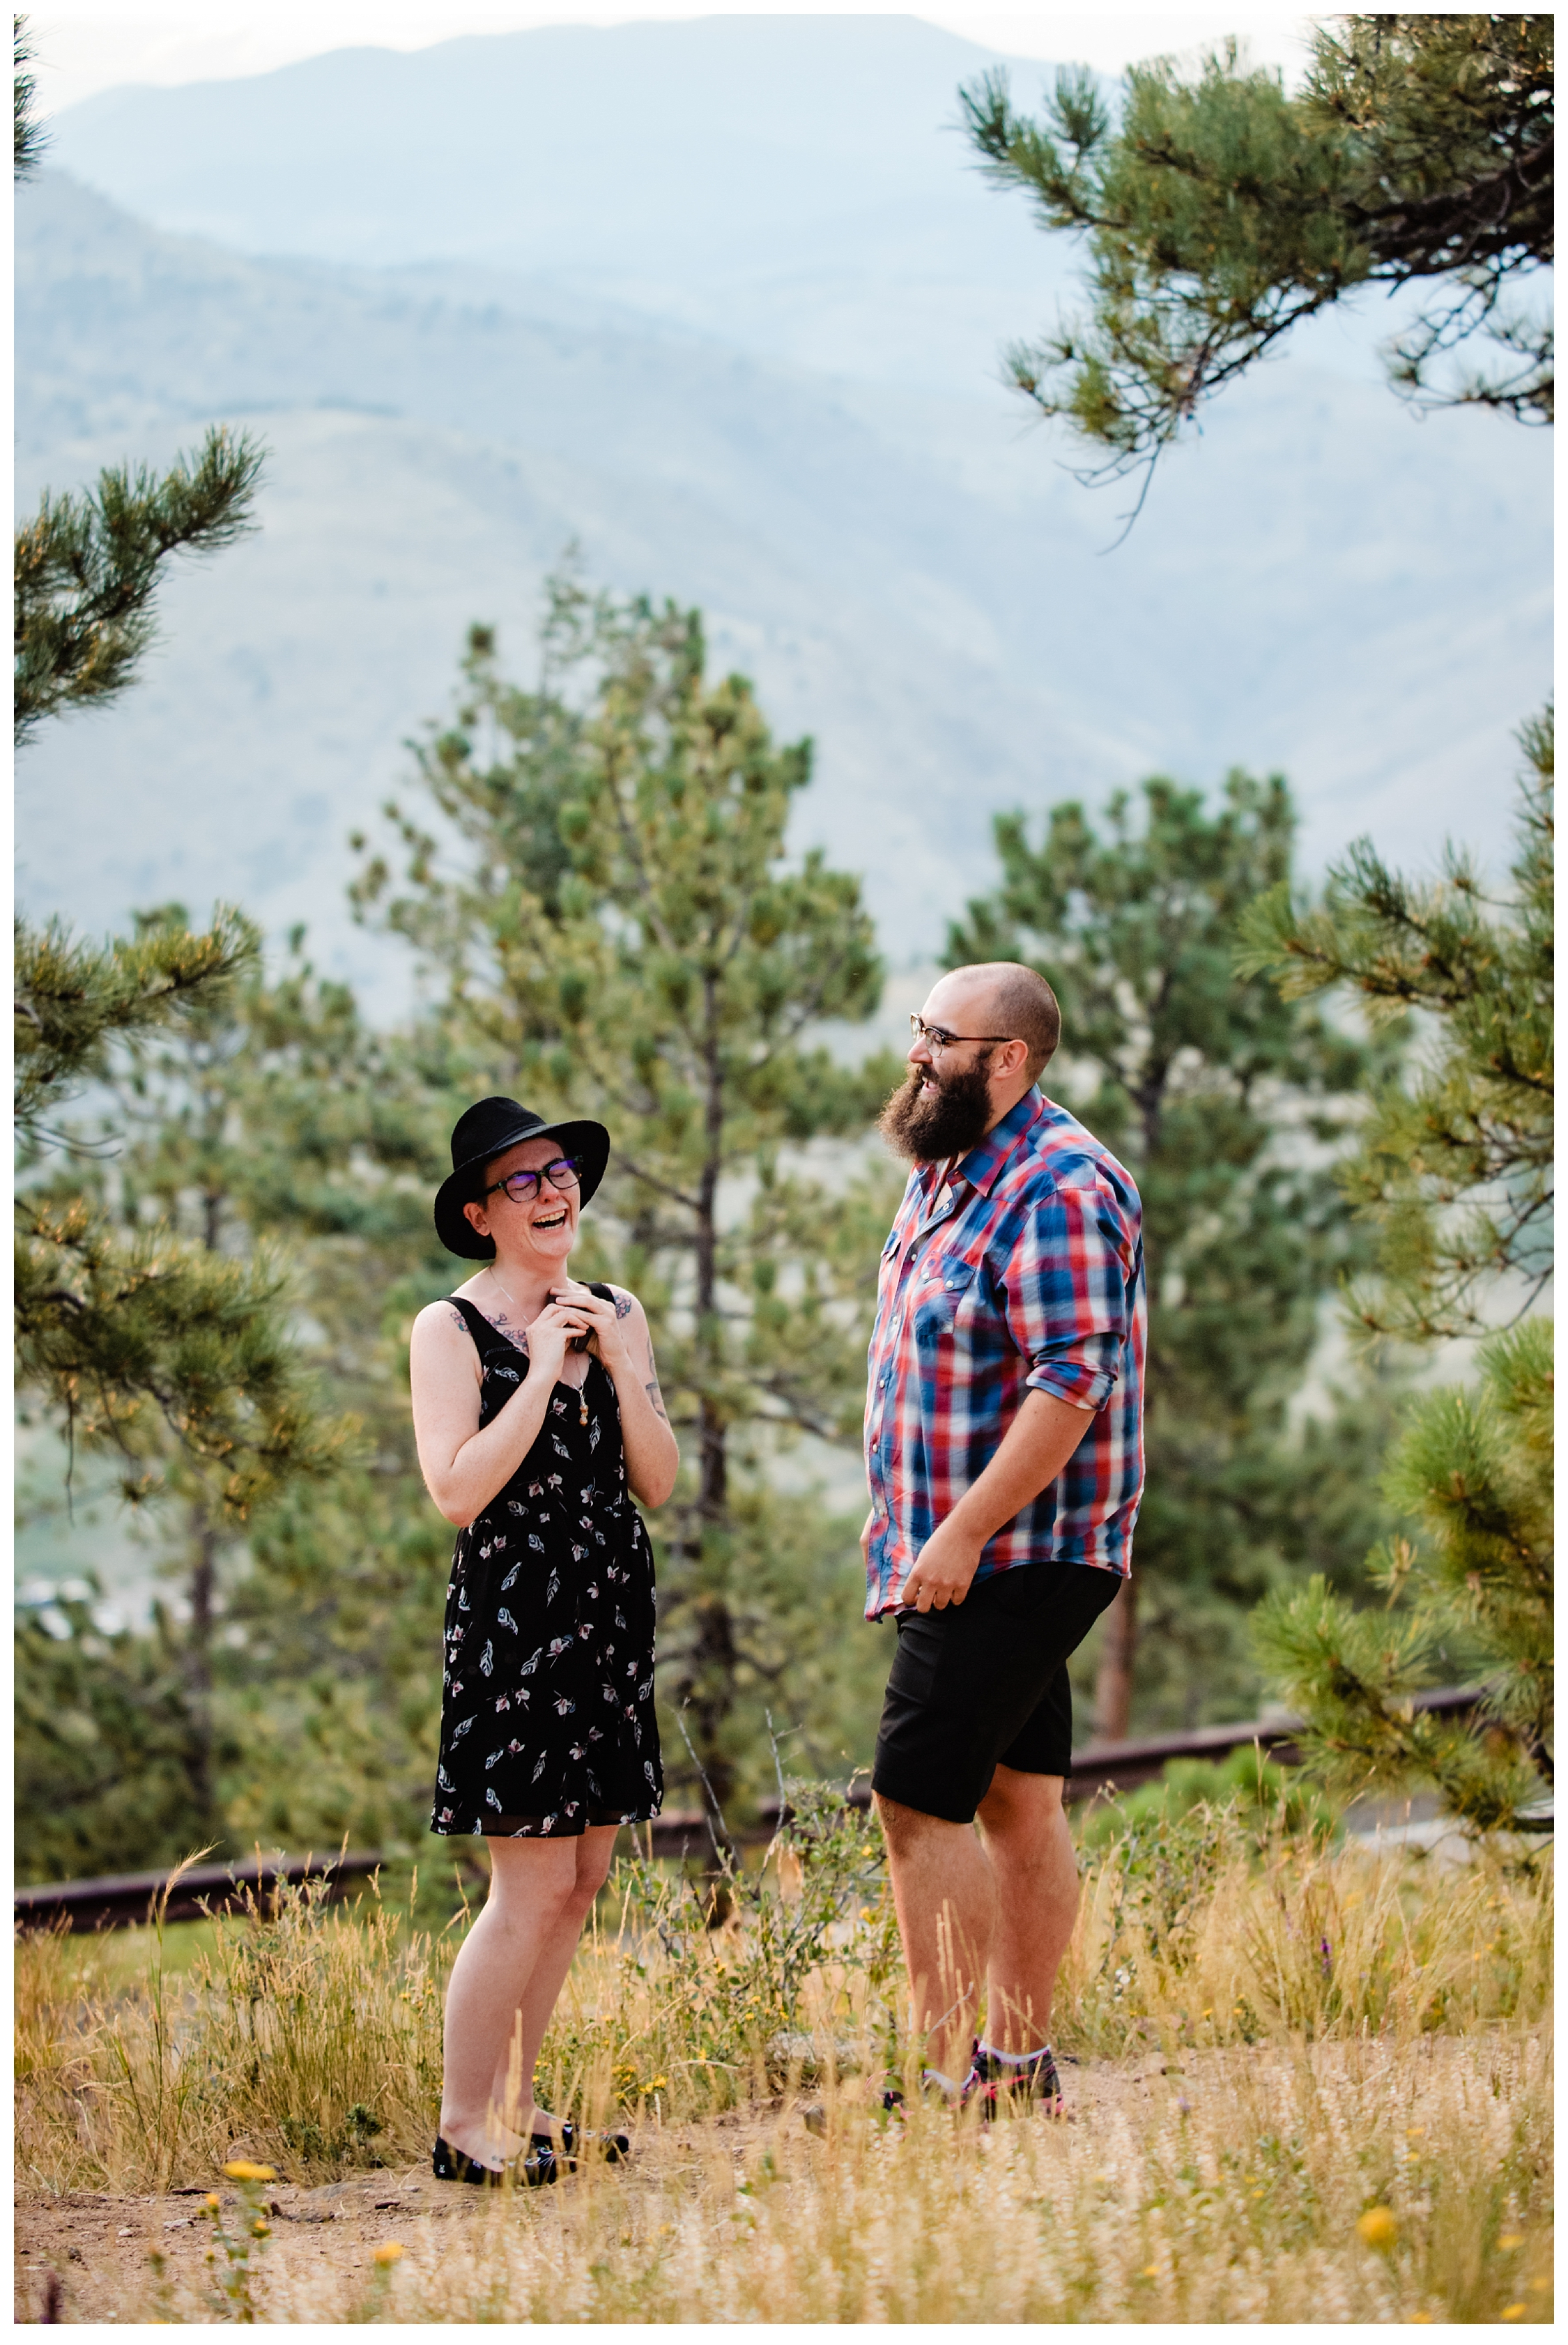 man proposing to his girlfriend on one knee in the mountains engagement story